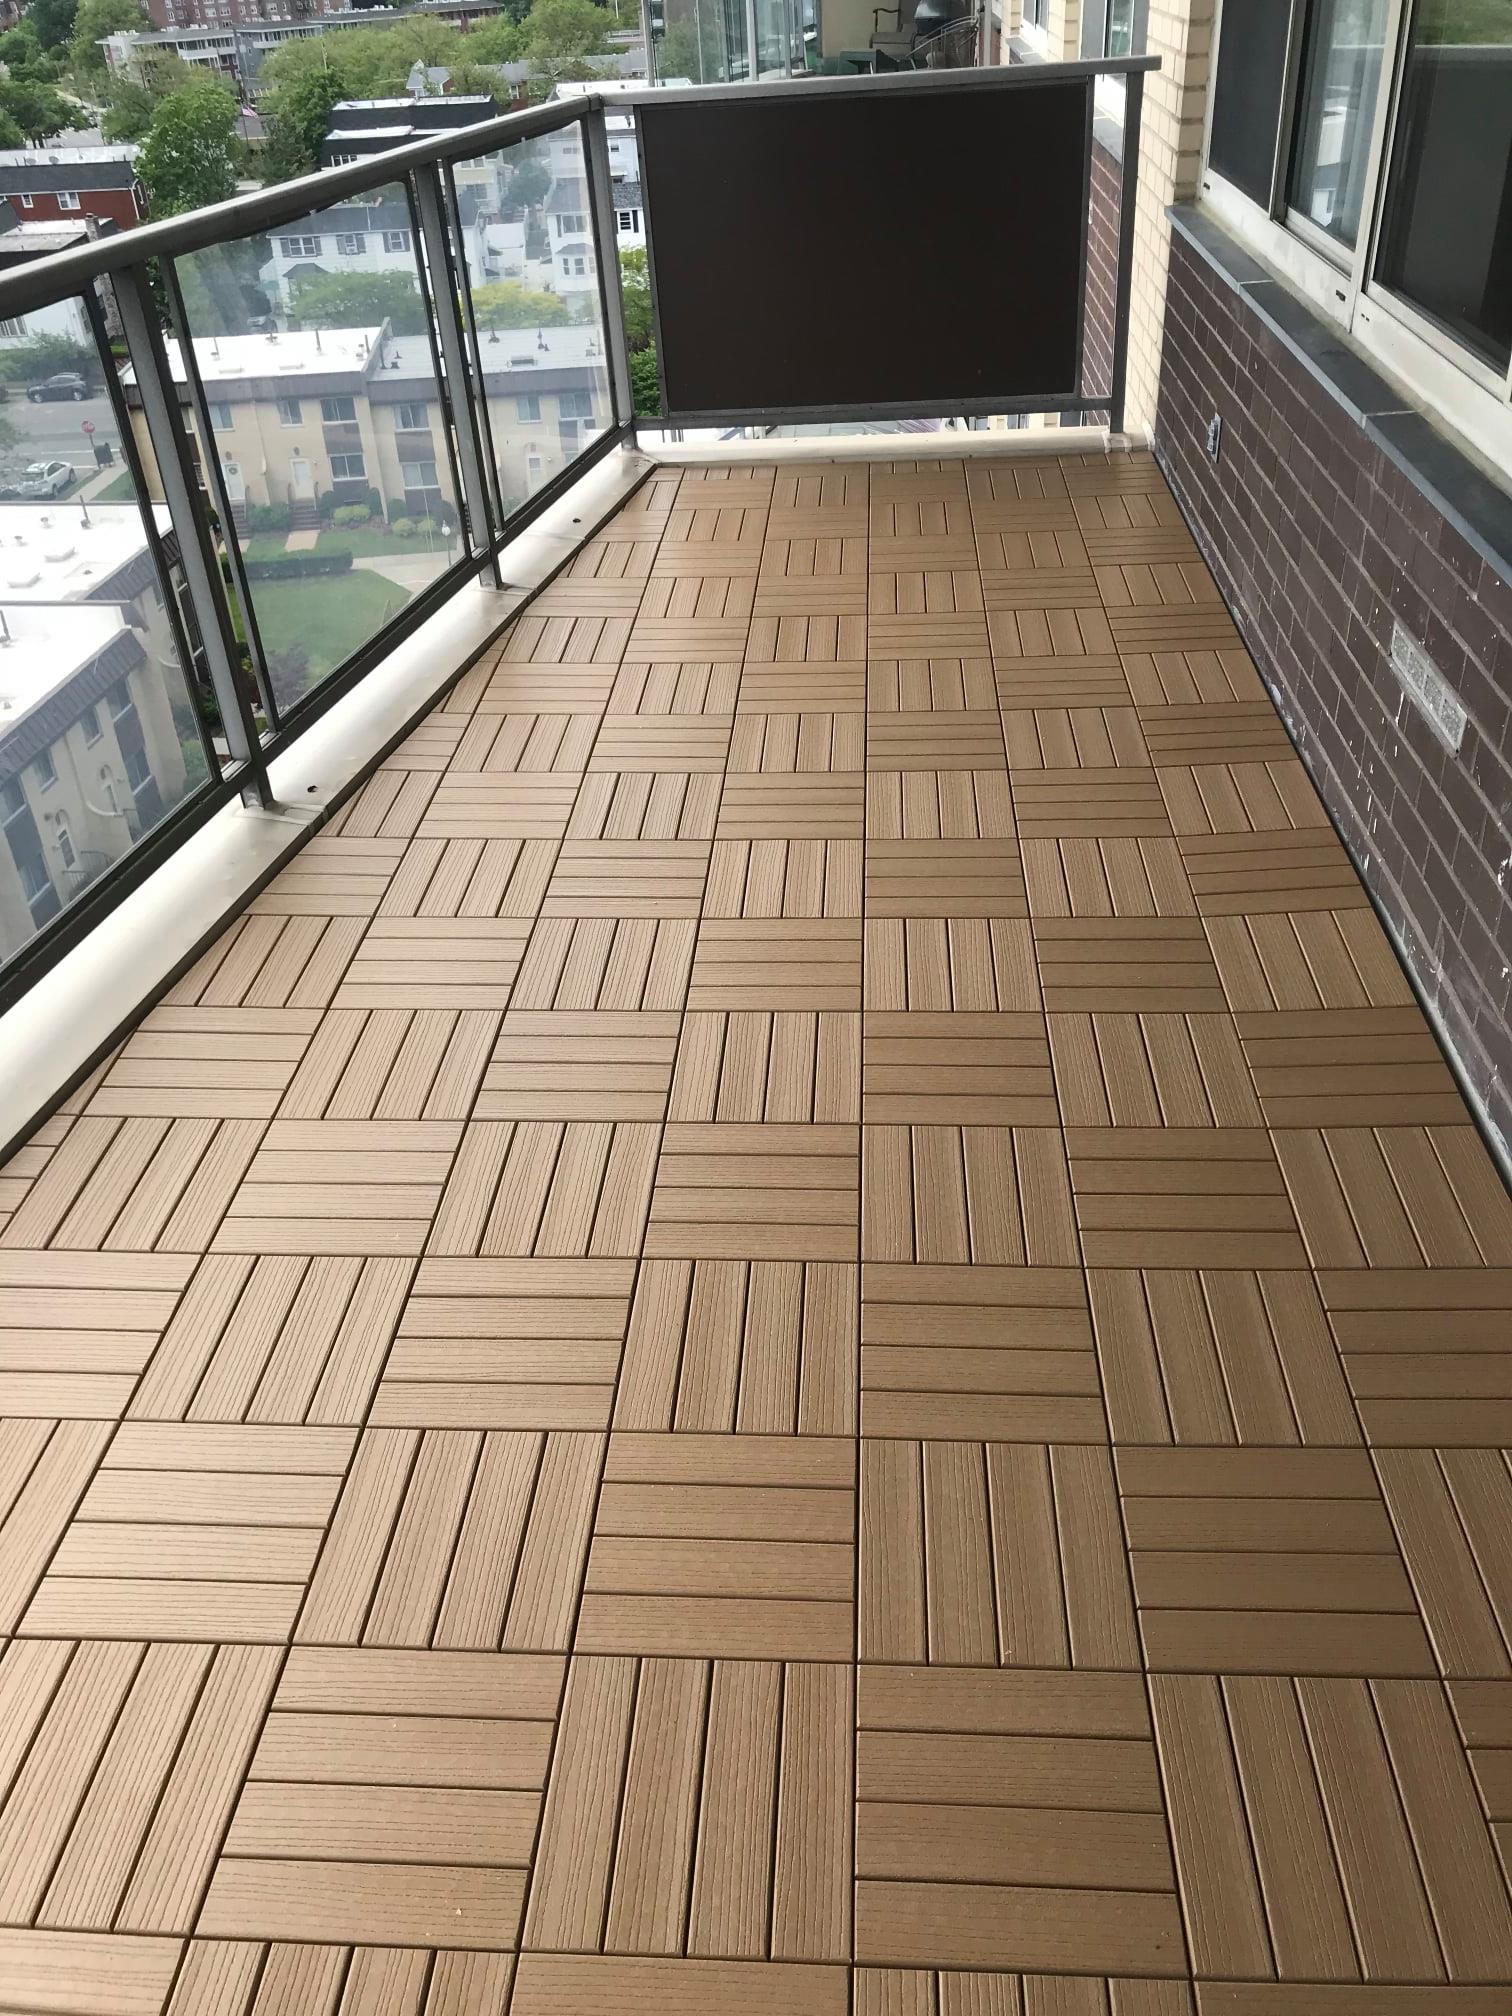 Showcase Weatherstone Composite Deck Tiles - Coverdeck Systems